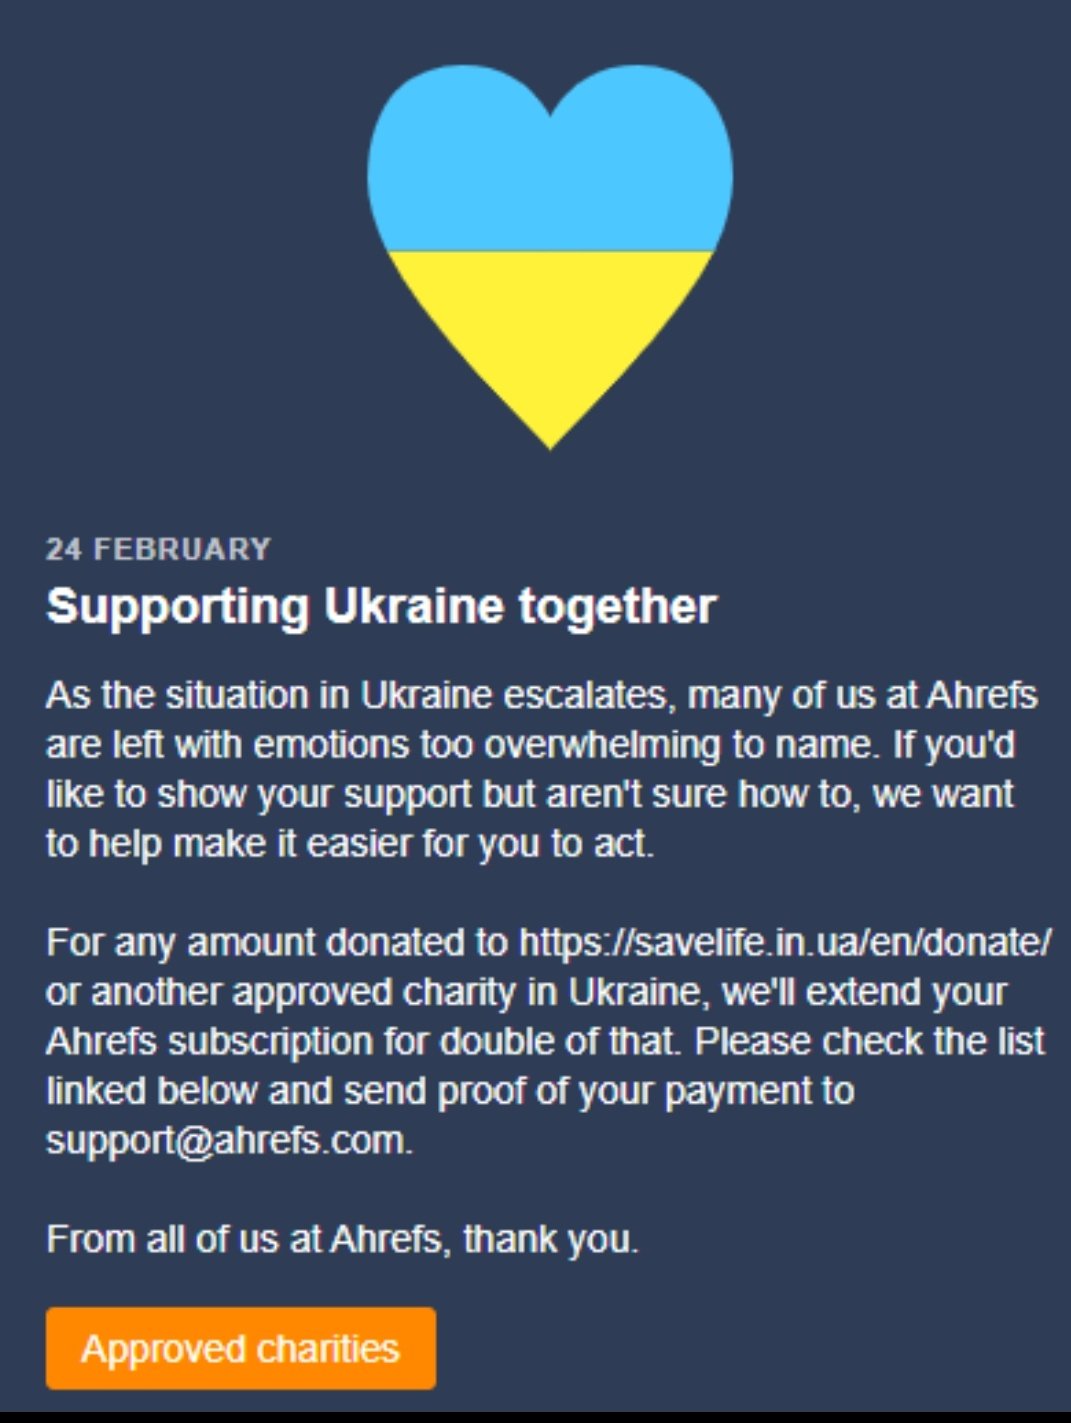 Crystal Carter on Twitter: "Thanks to @ahrefs for highlighting charities  that are supporting Ukraine during this time. Best wishes to everyone  there. https://t.co/2Z37NIQf6s https://t.co/D08PIQiiyq" / Twitter